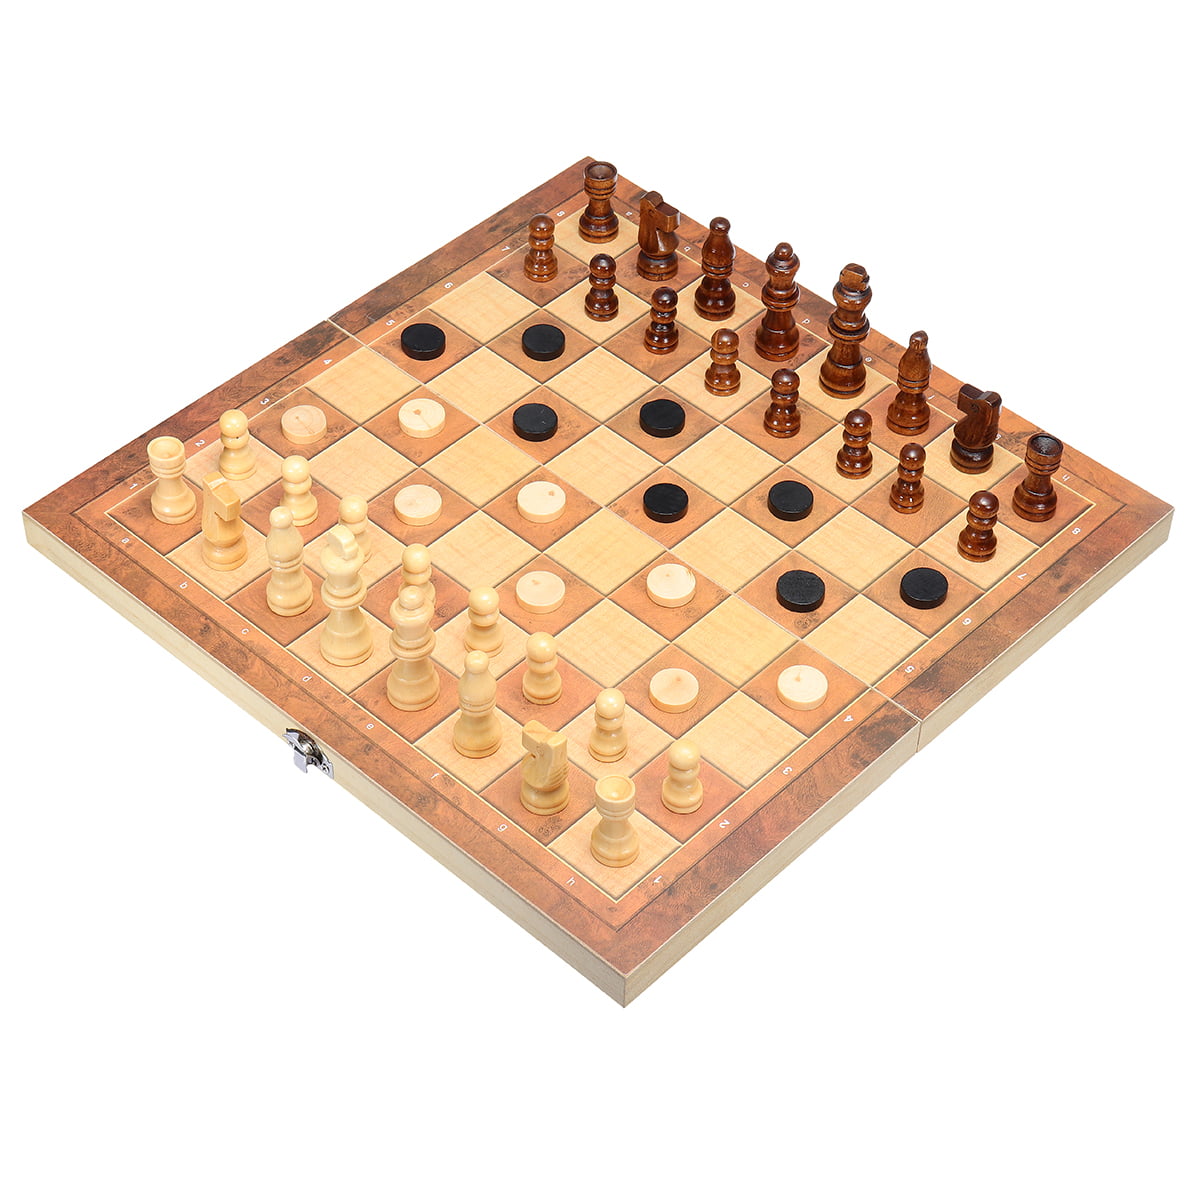 3in1 Large Folding Wooden Chess Set Board Game Children Educational Games A4164 